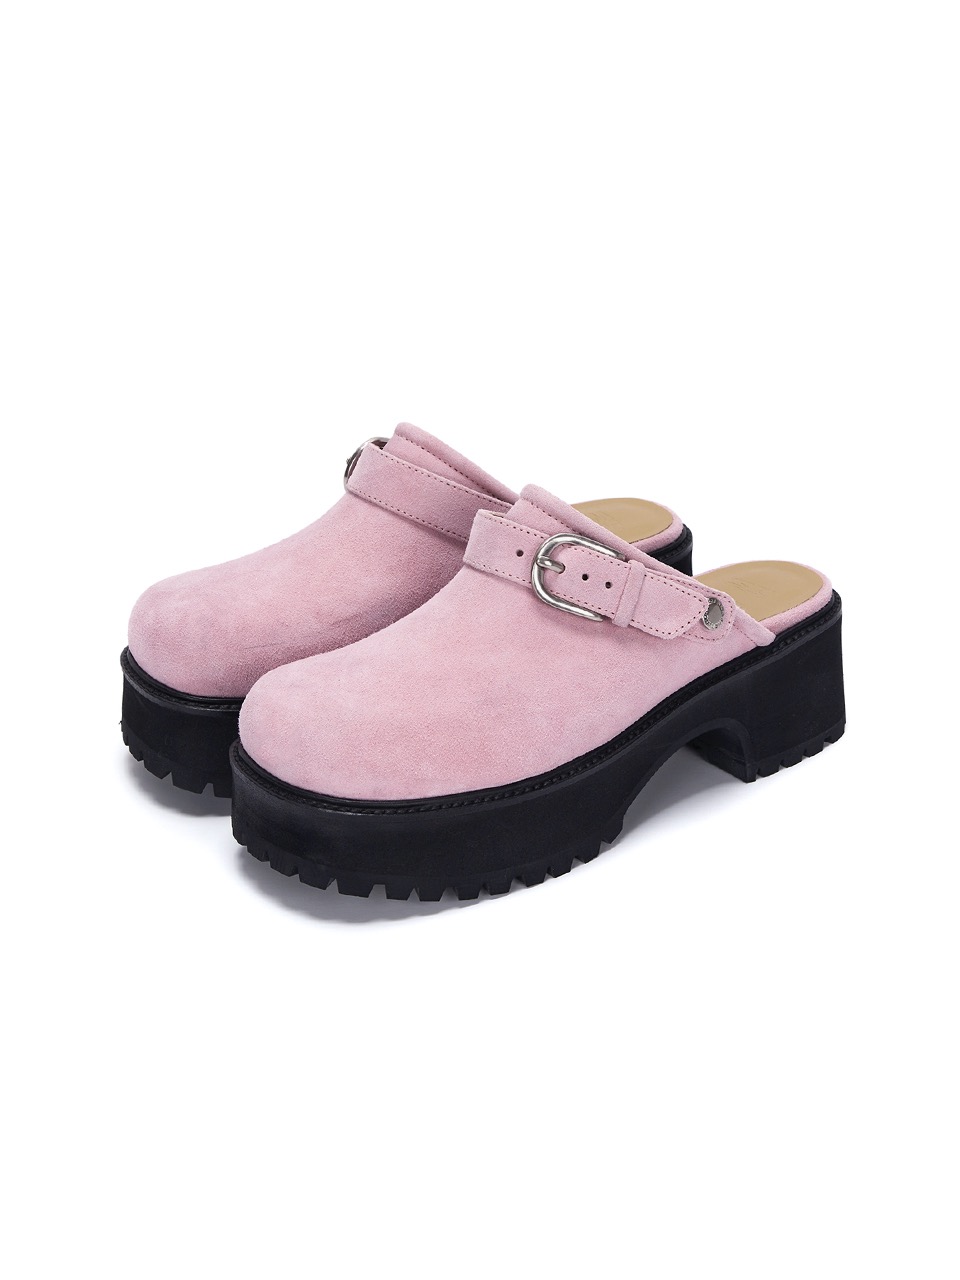 70&#039;s CLOGS_pink suede